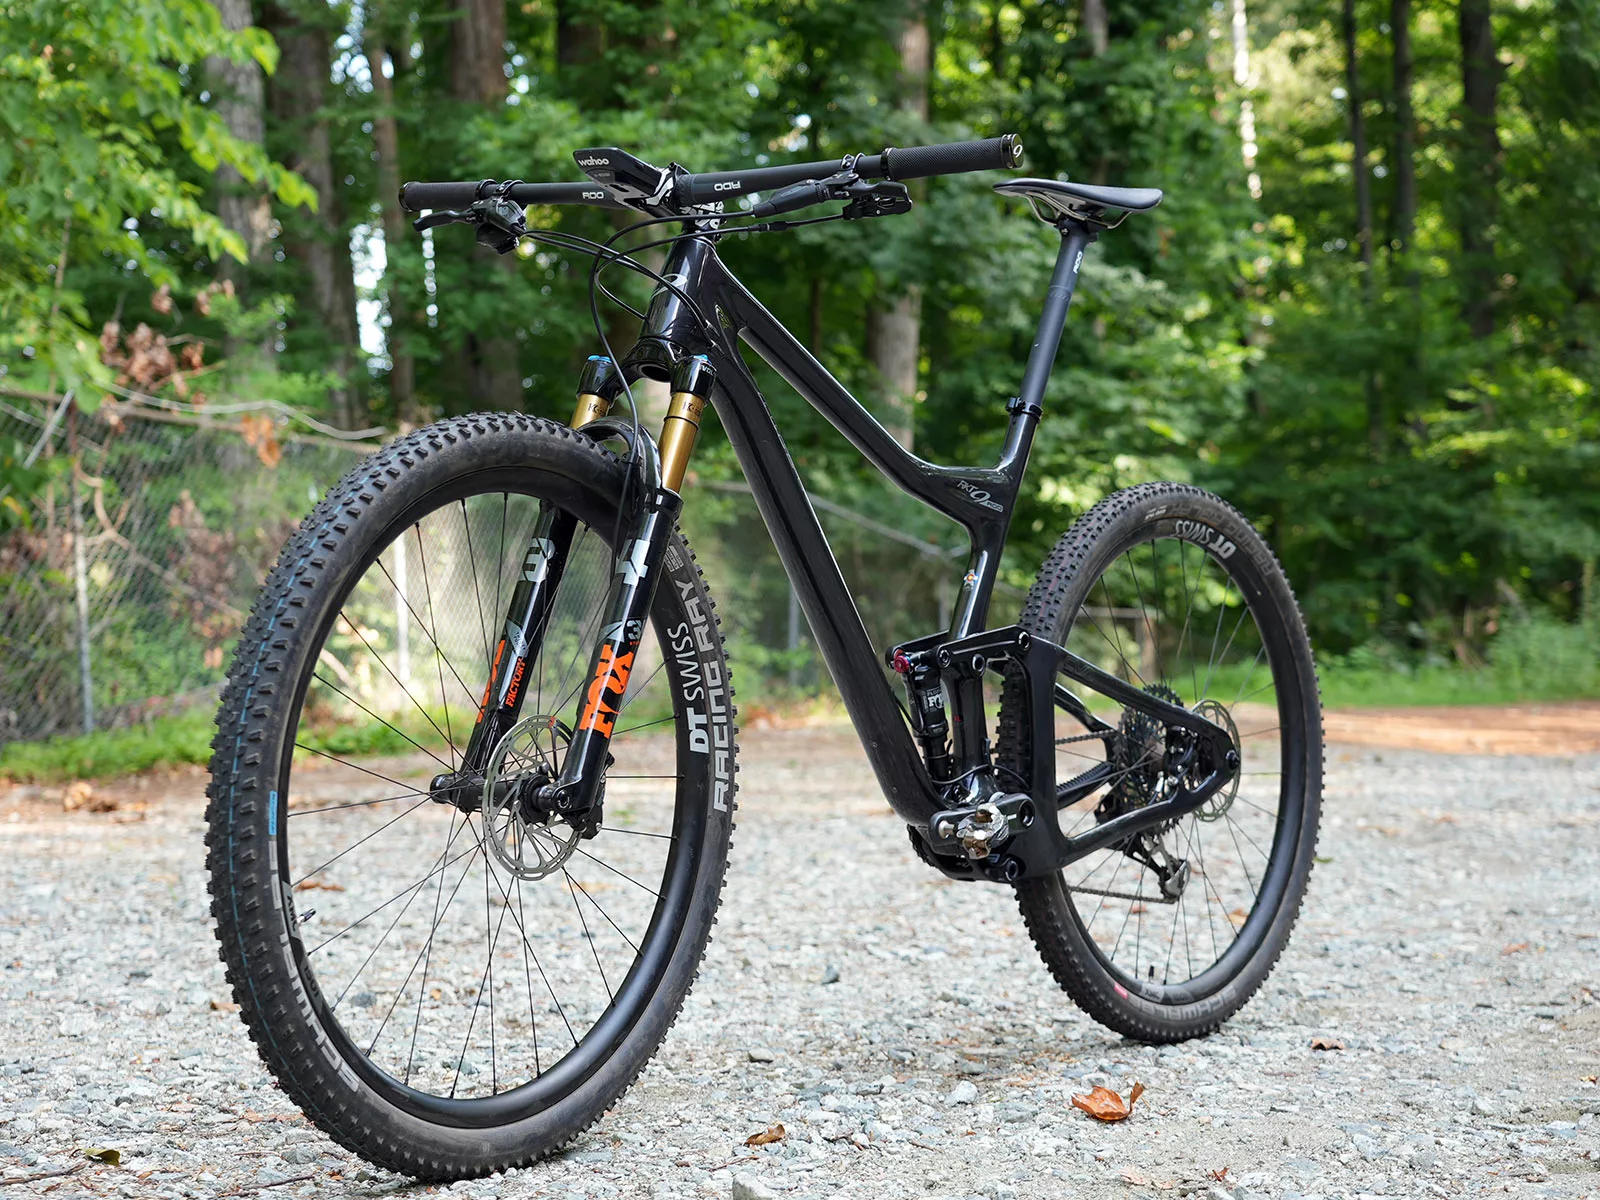 2022 Niner RKT mountain bike shown from front angle